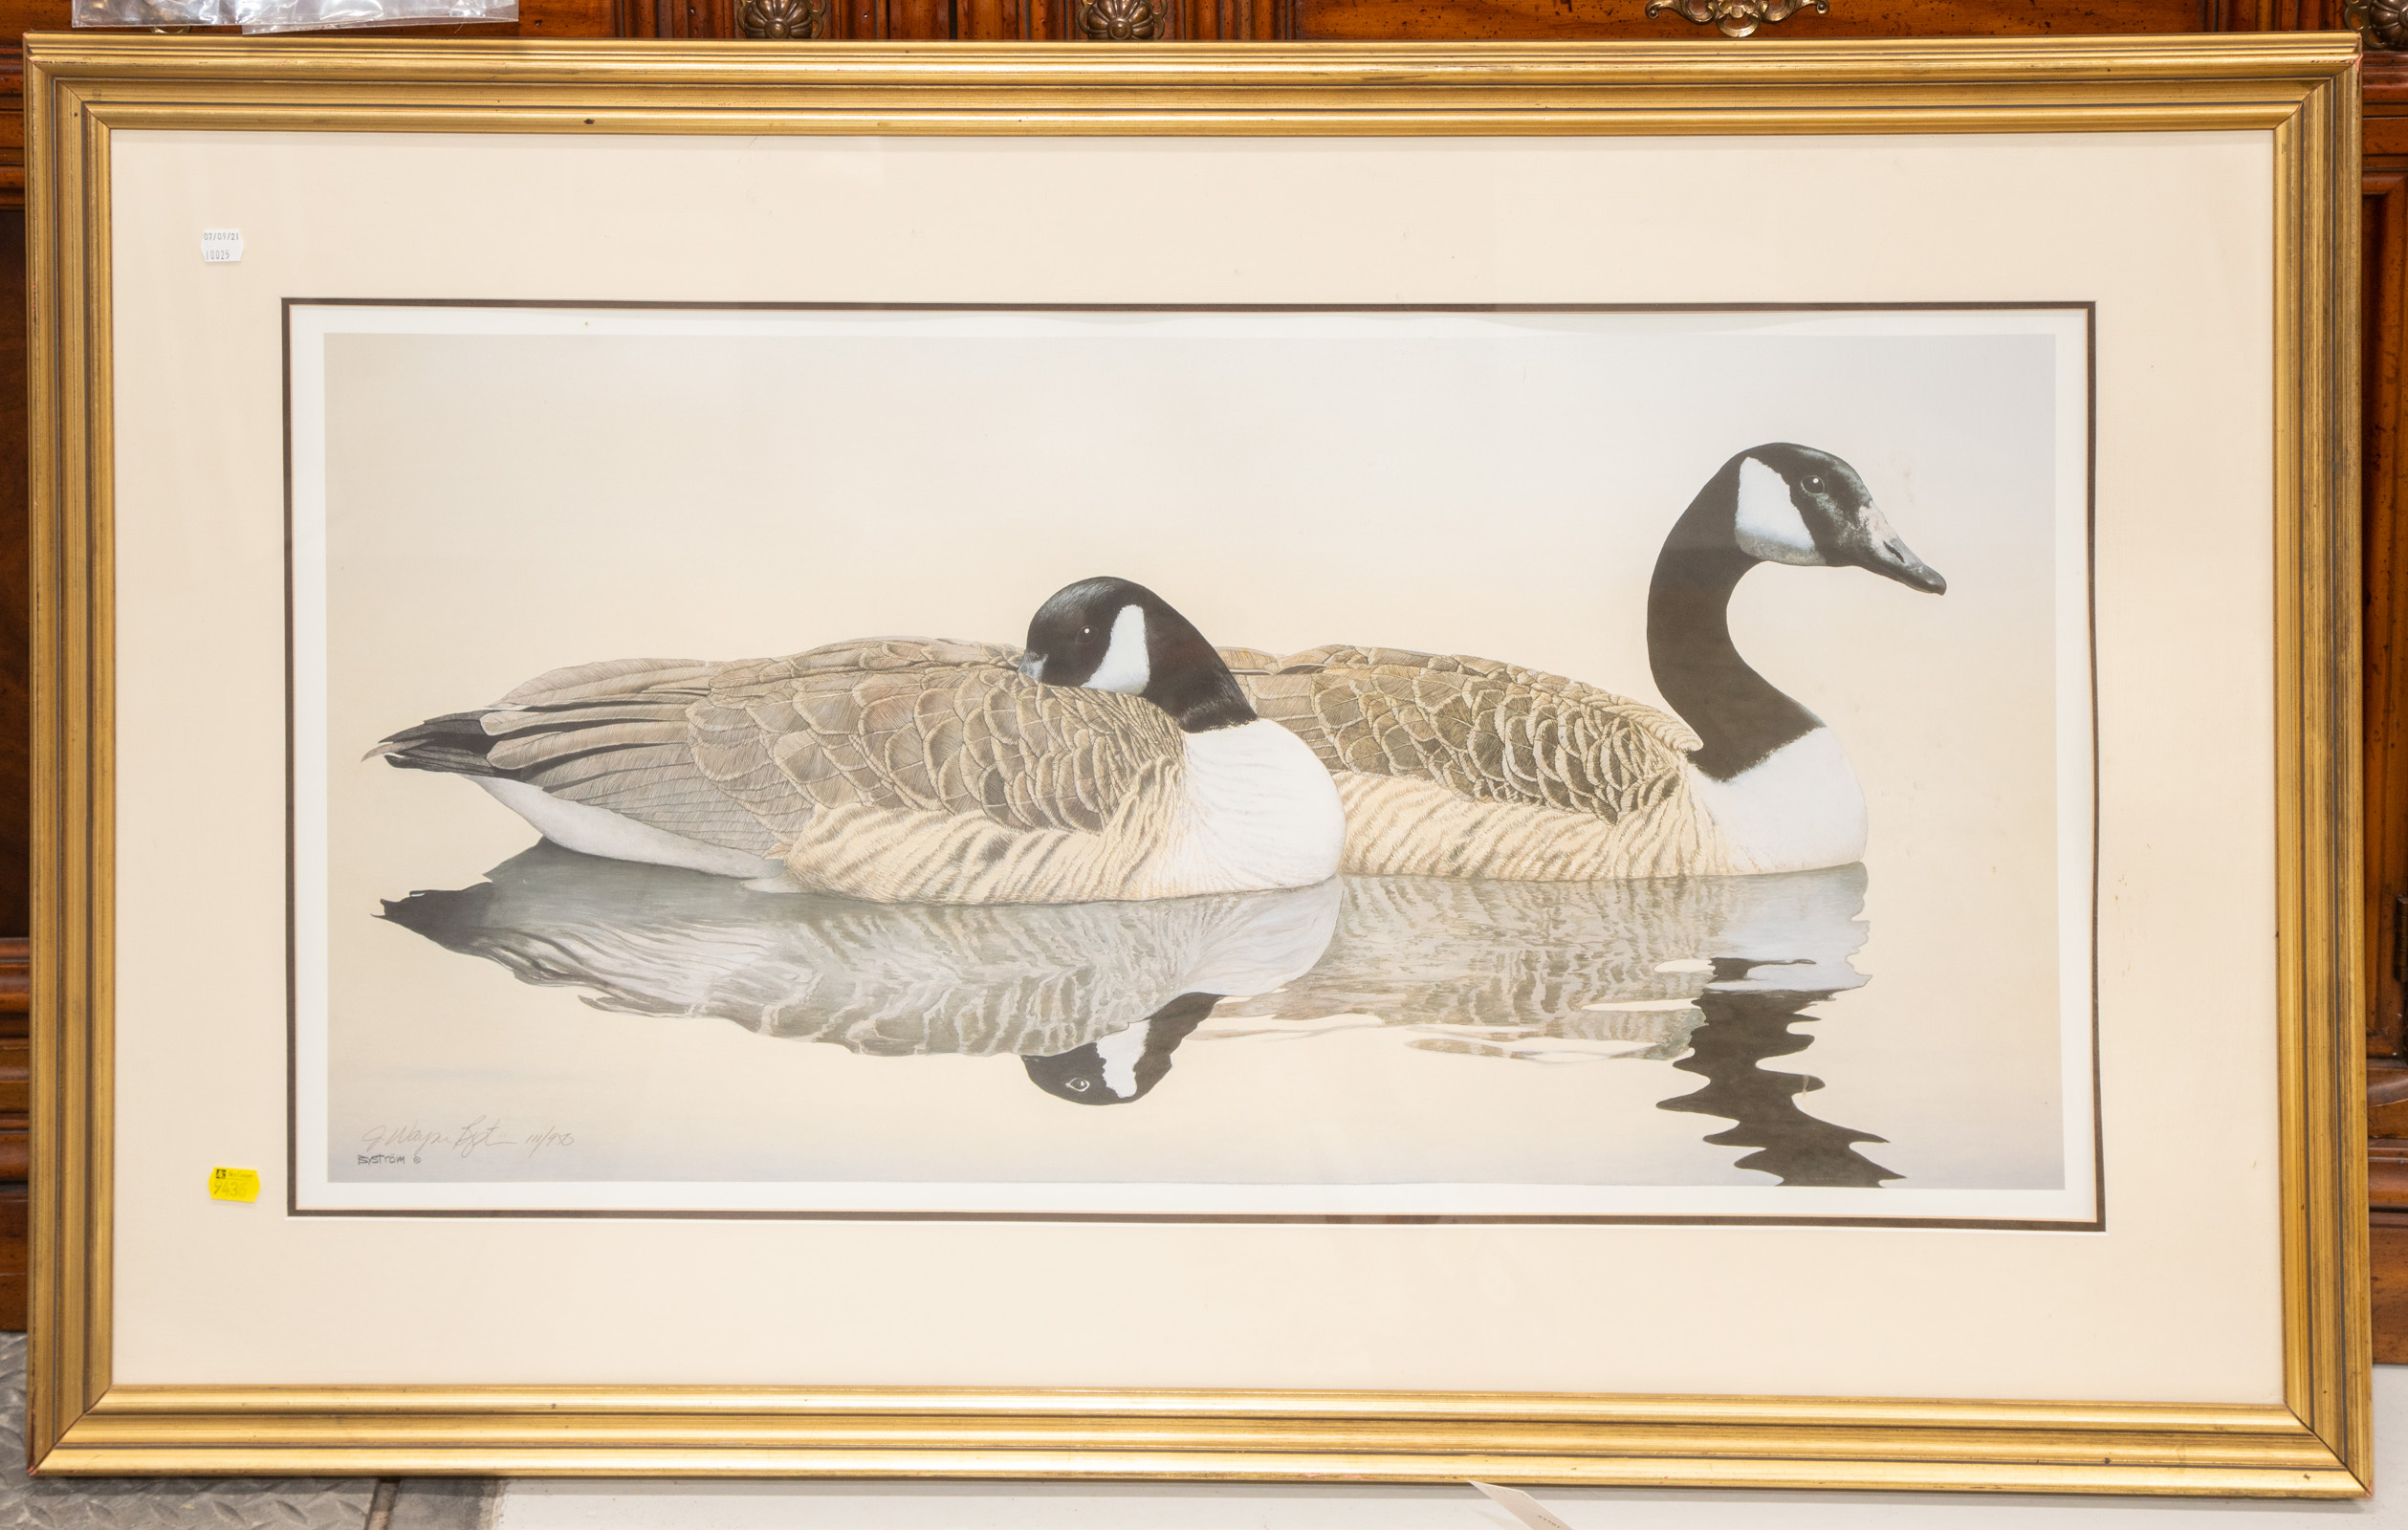 BYSTROM. TWO GEESE, PRINT Signed.